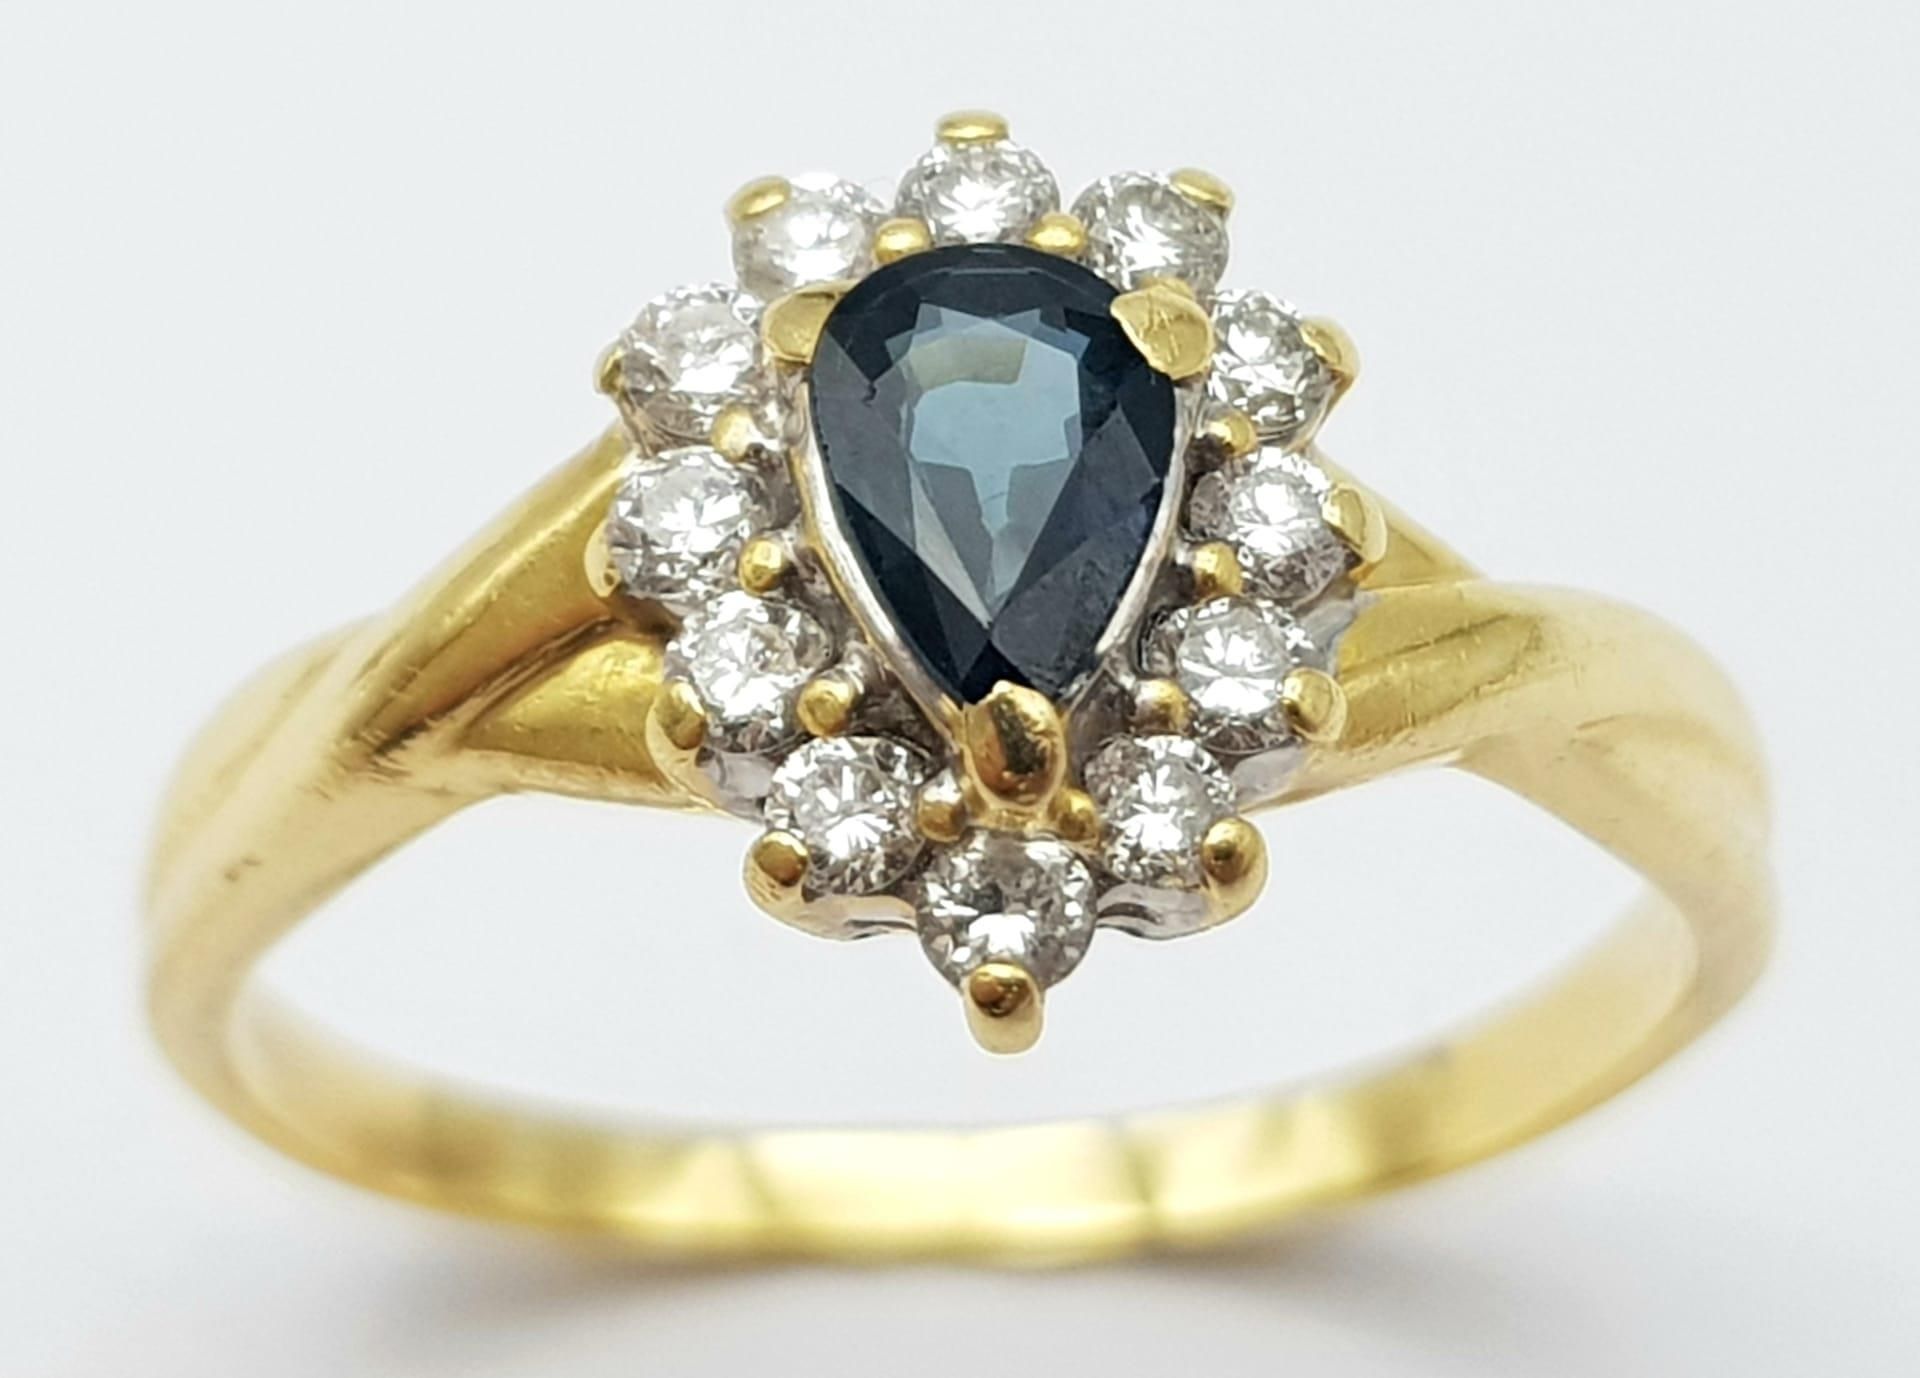 AN 18K YELLOW GOLD DIAMOND & SAPPHIRE PEAR SHAPED CLUSTER RING. 3.2G. SIZE R. - Image 2 of 5